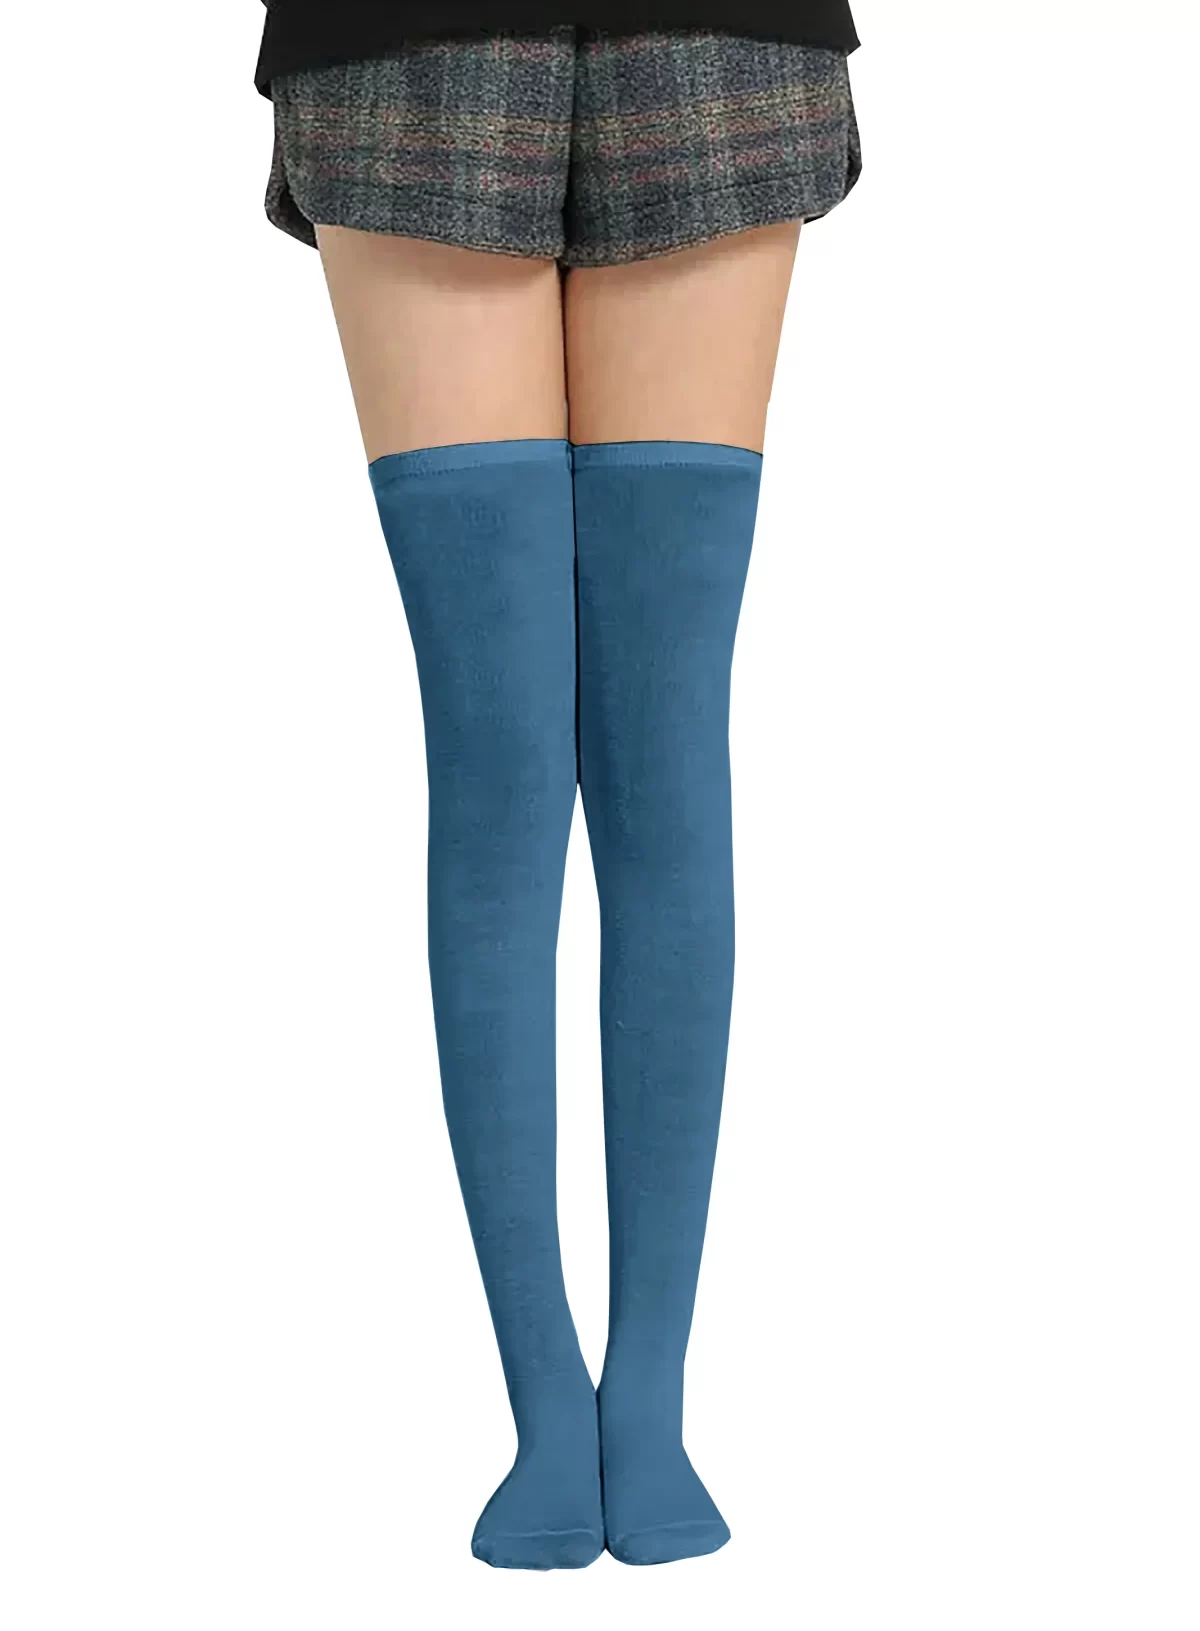 Steel Blue Girls and Women's Thigh High Stocking/Socks ( Free Size )1